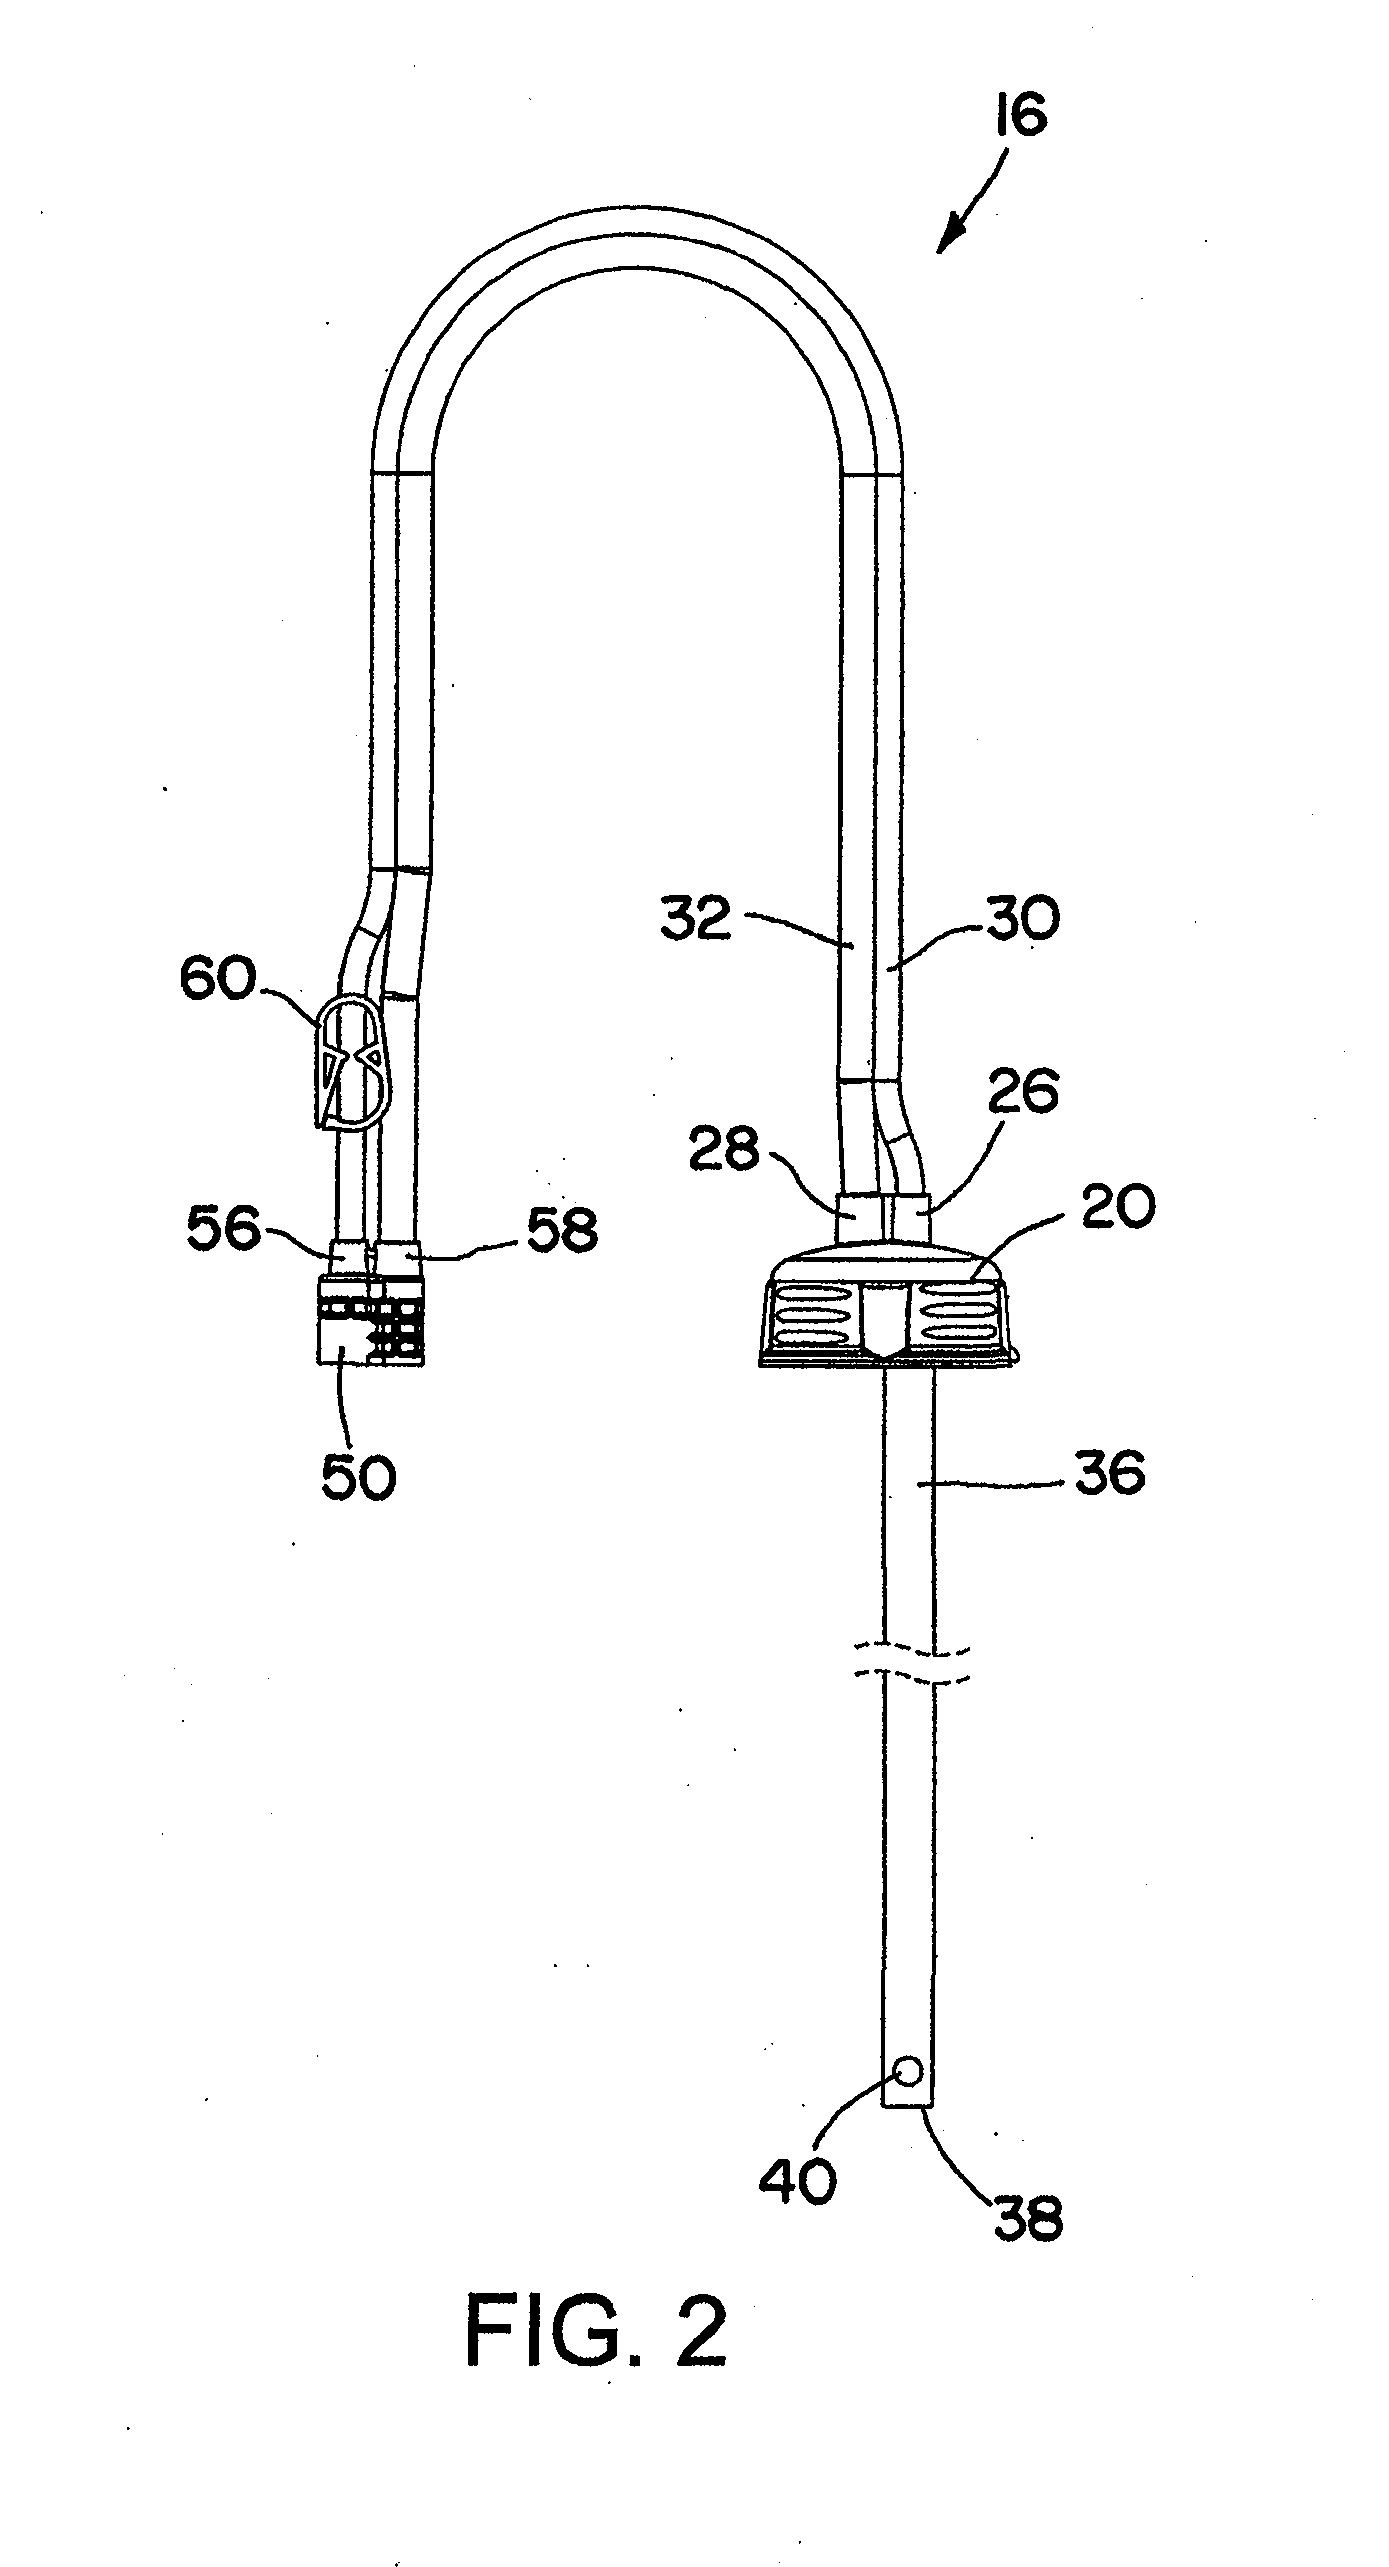 Water bottle adapter for coupling an endoscope to a water bottle